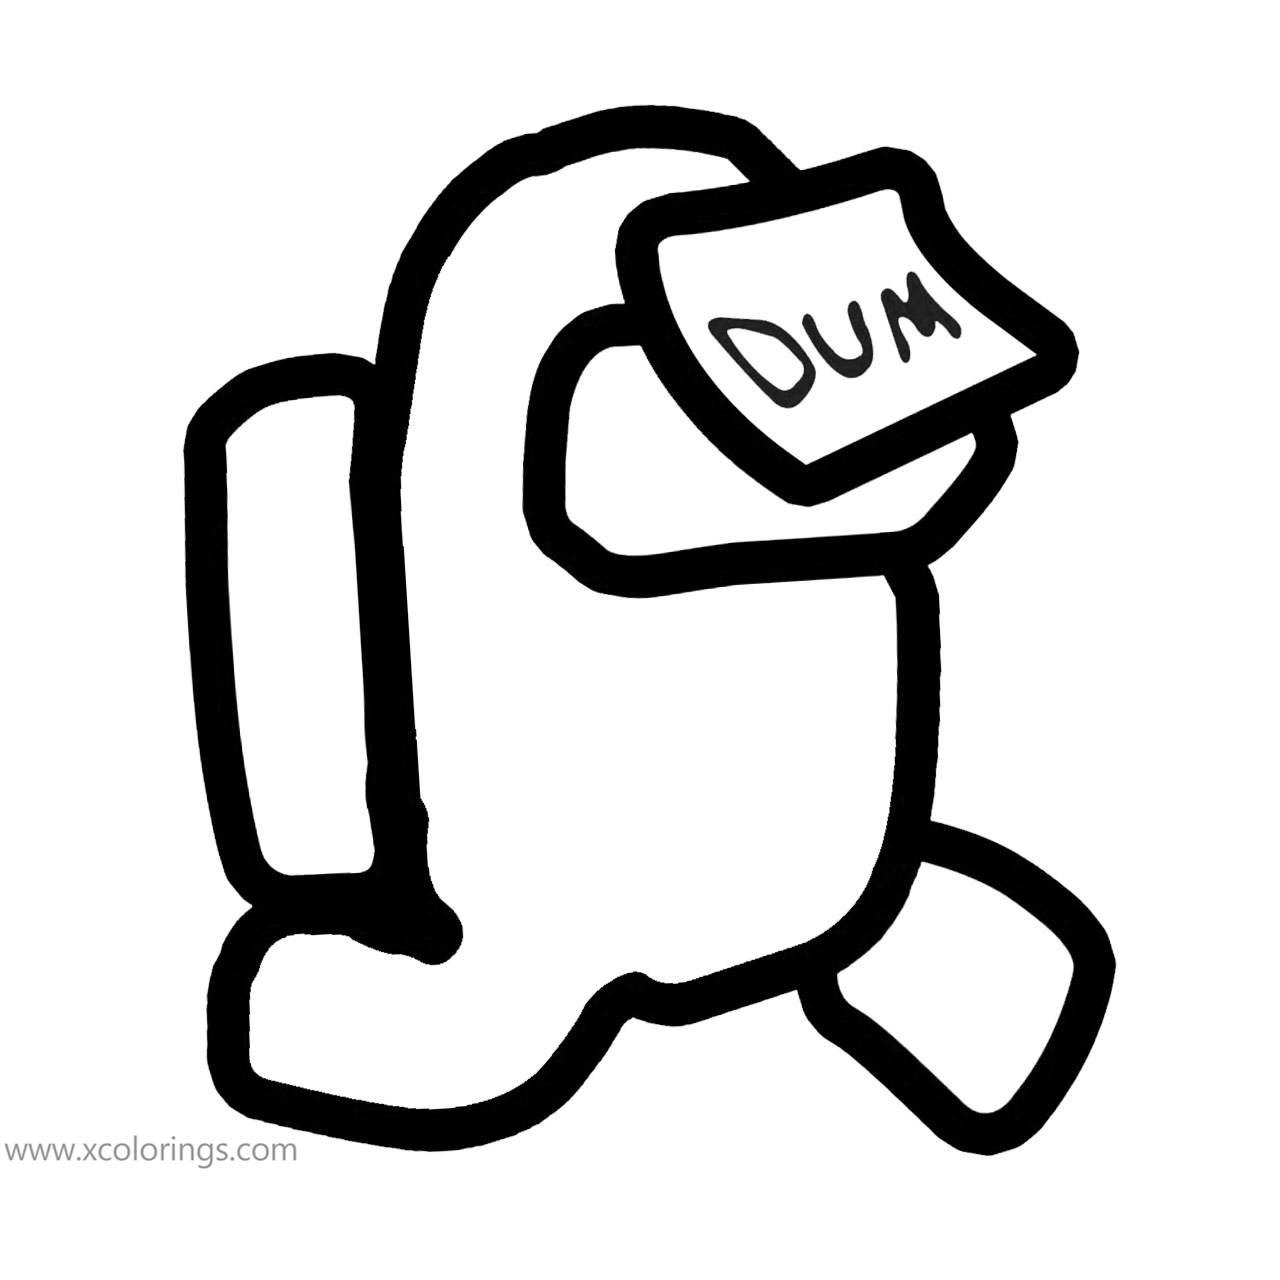 Free Among Us Coloring Pages Among Us Coloring Pages Dum Character printable